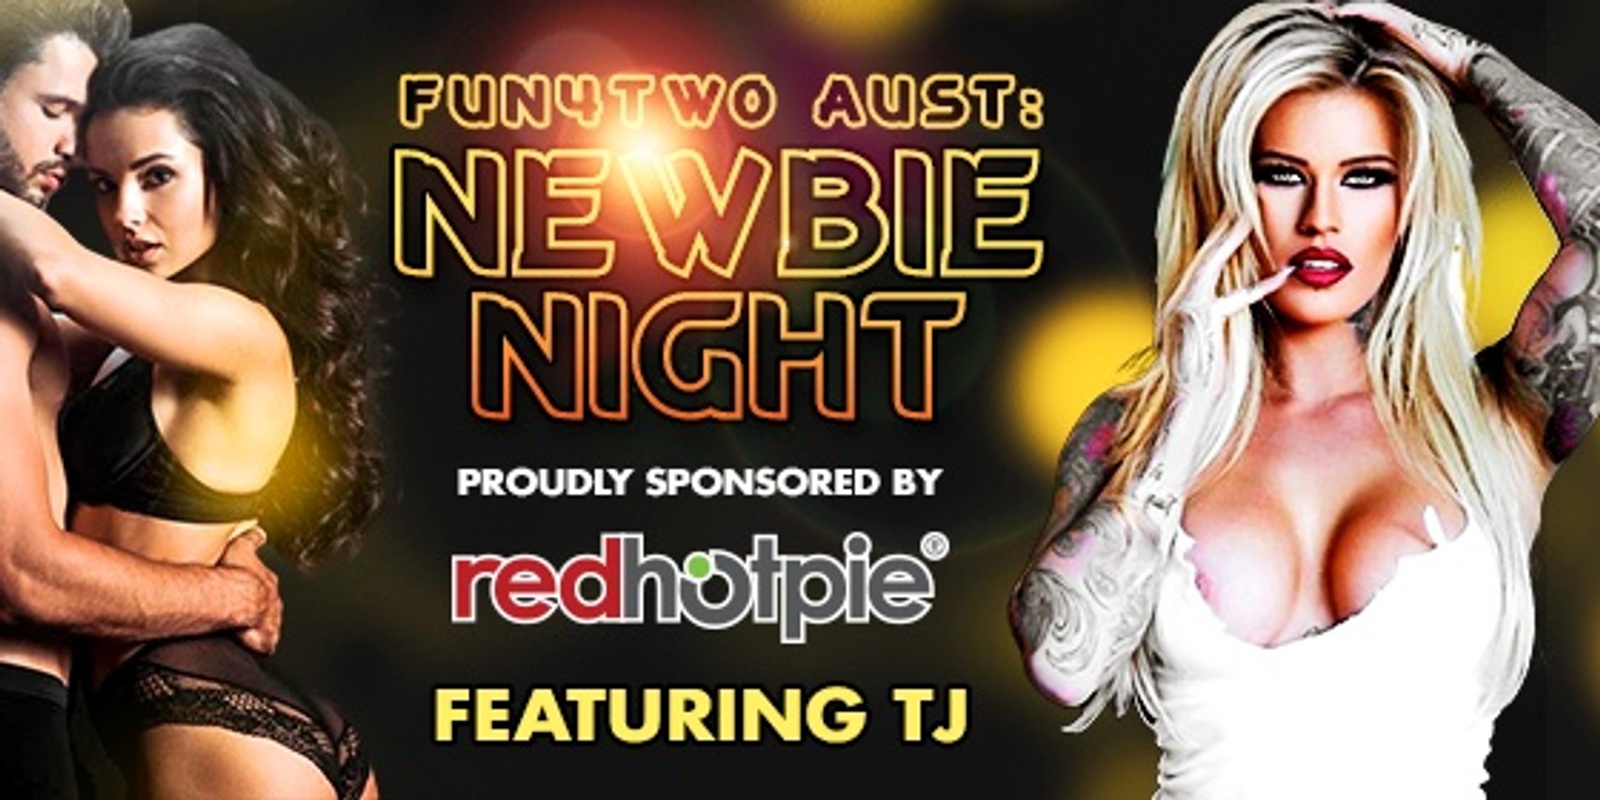 Banner image for FUN4TWO Newbie Night